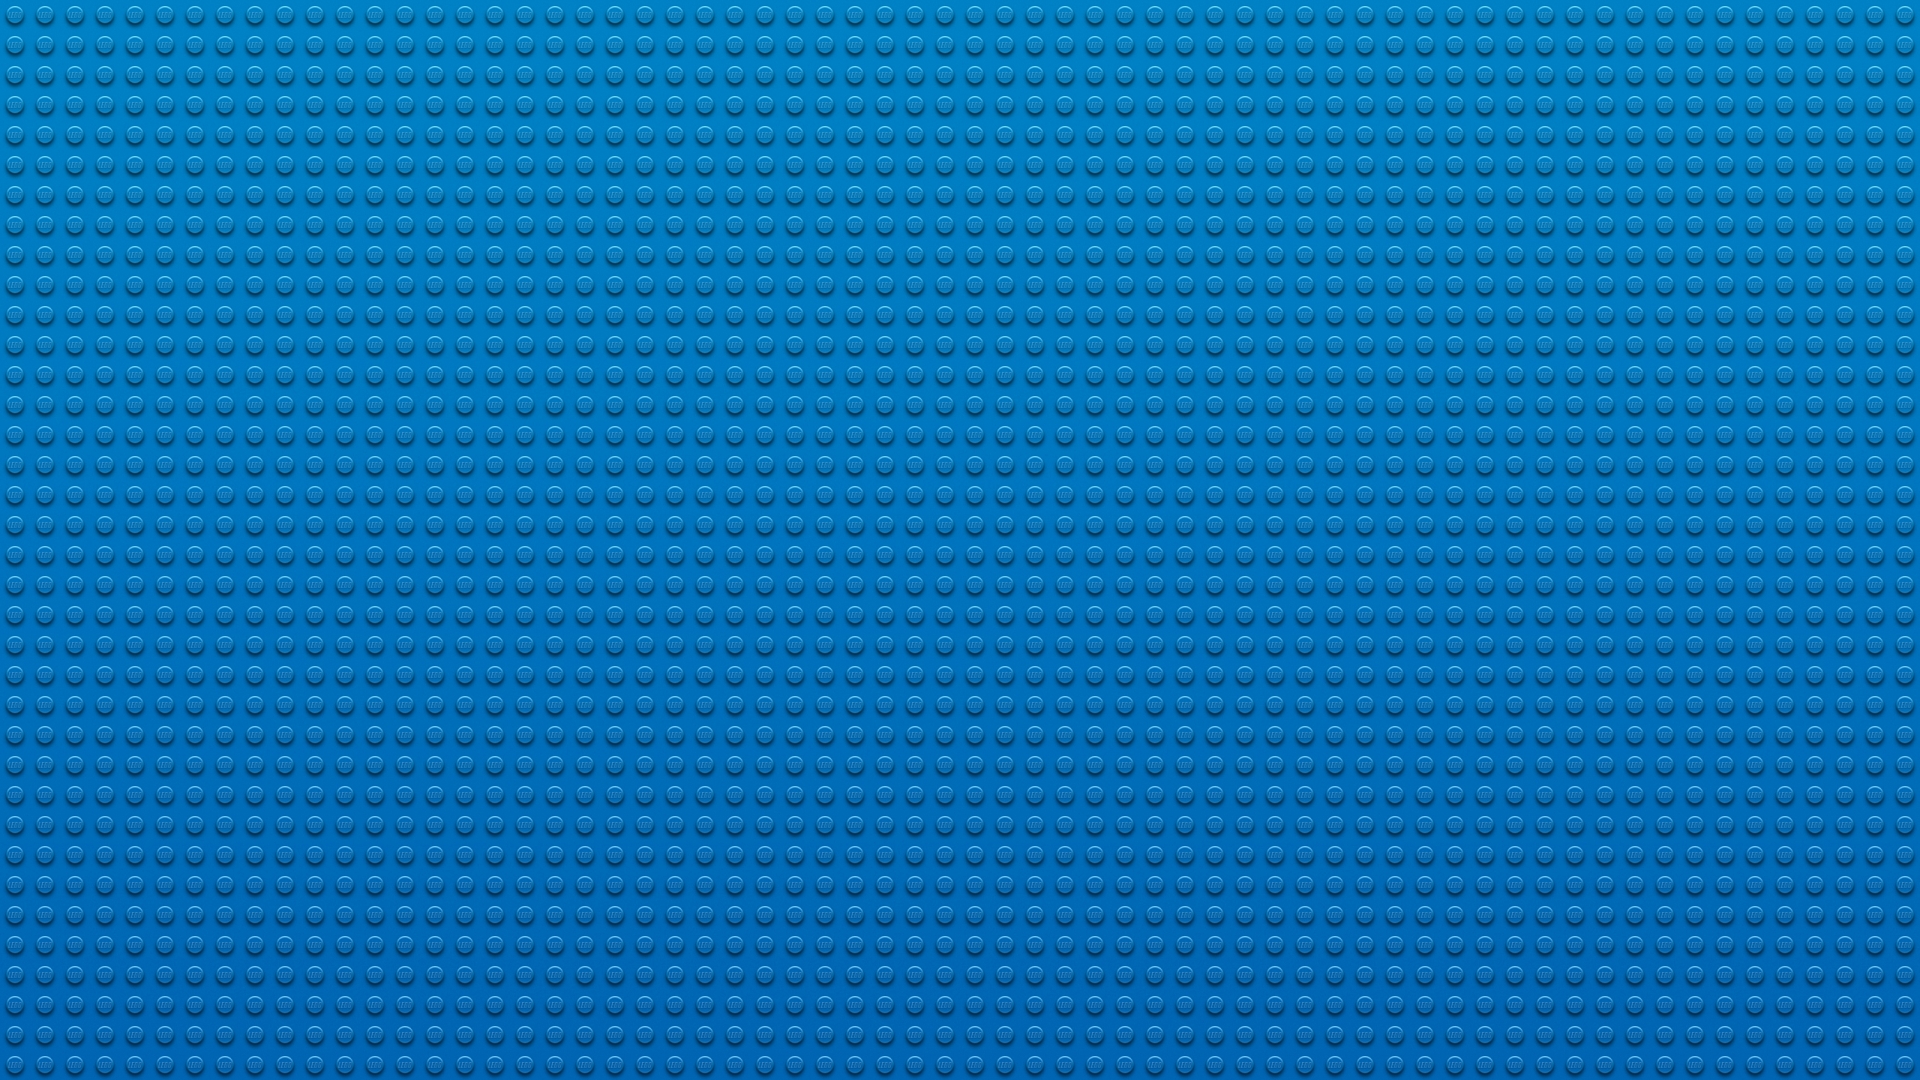 Lego Texture for 1920 x 1080 HDTV 1080p resolution